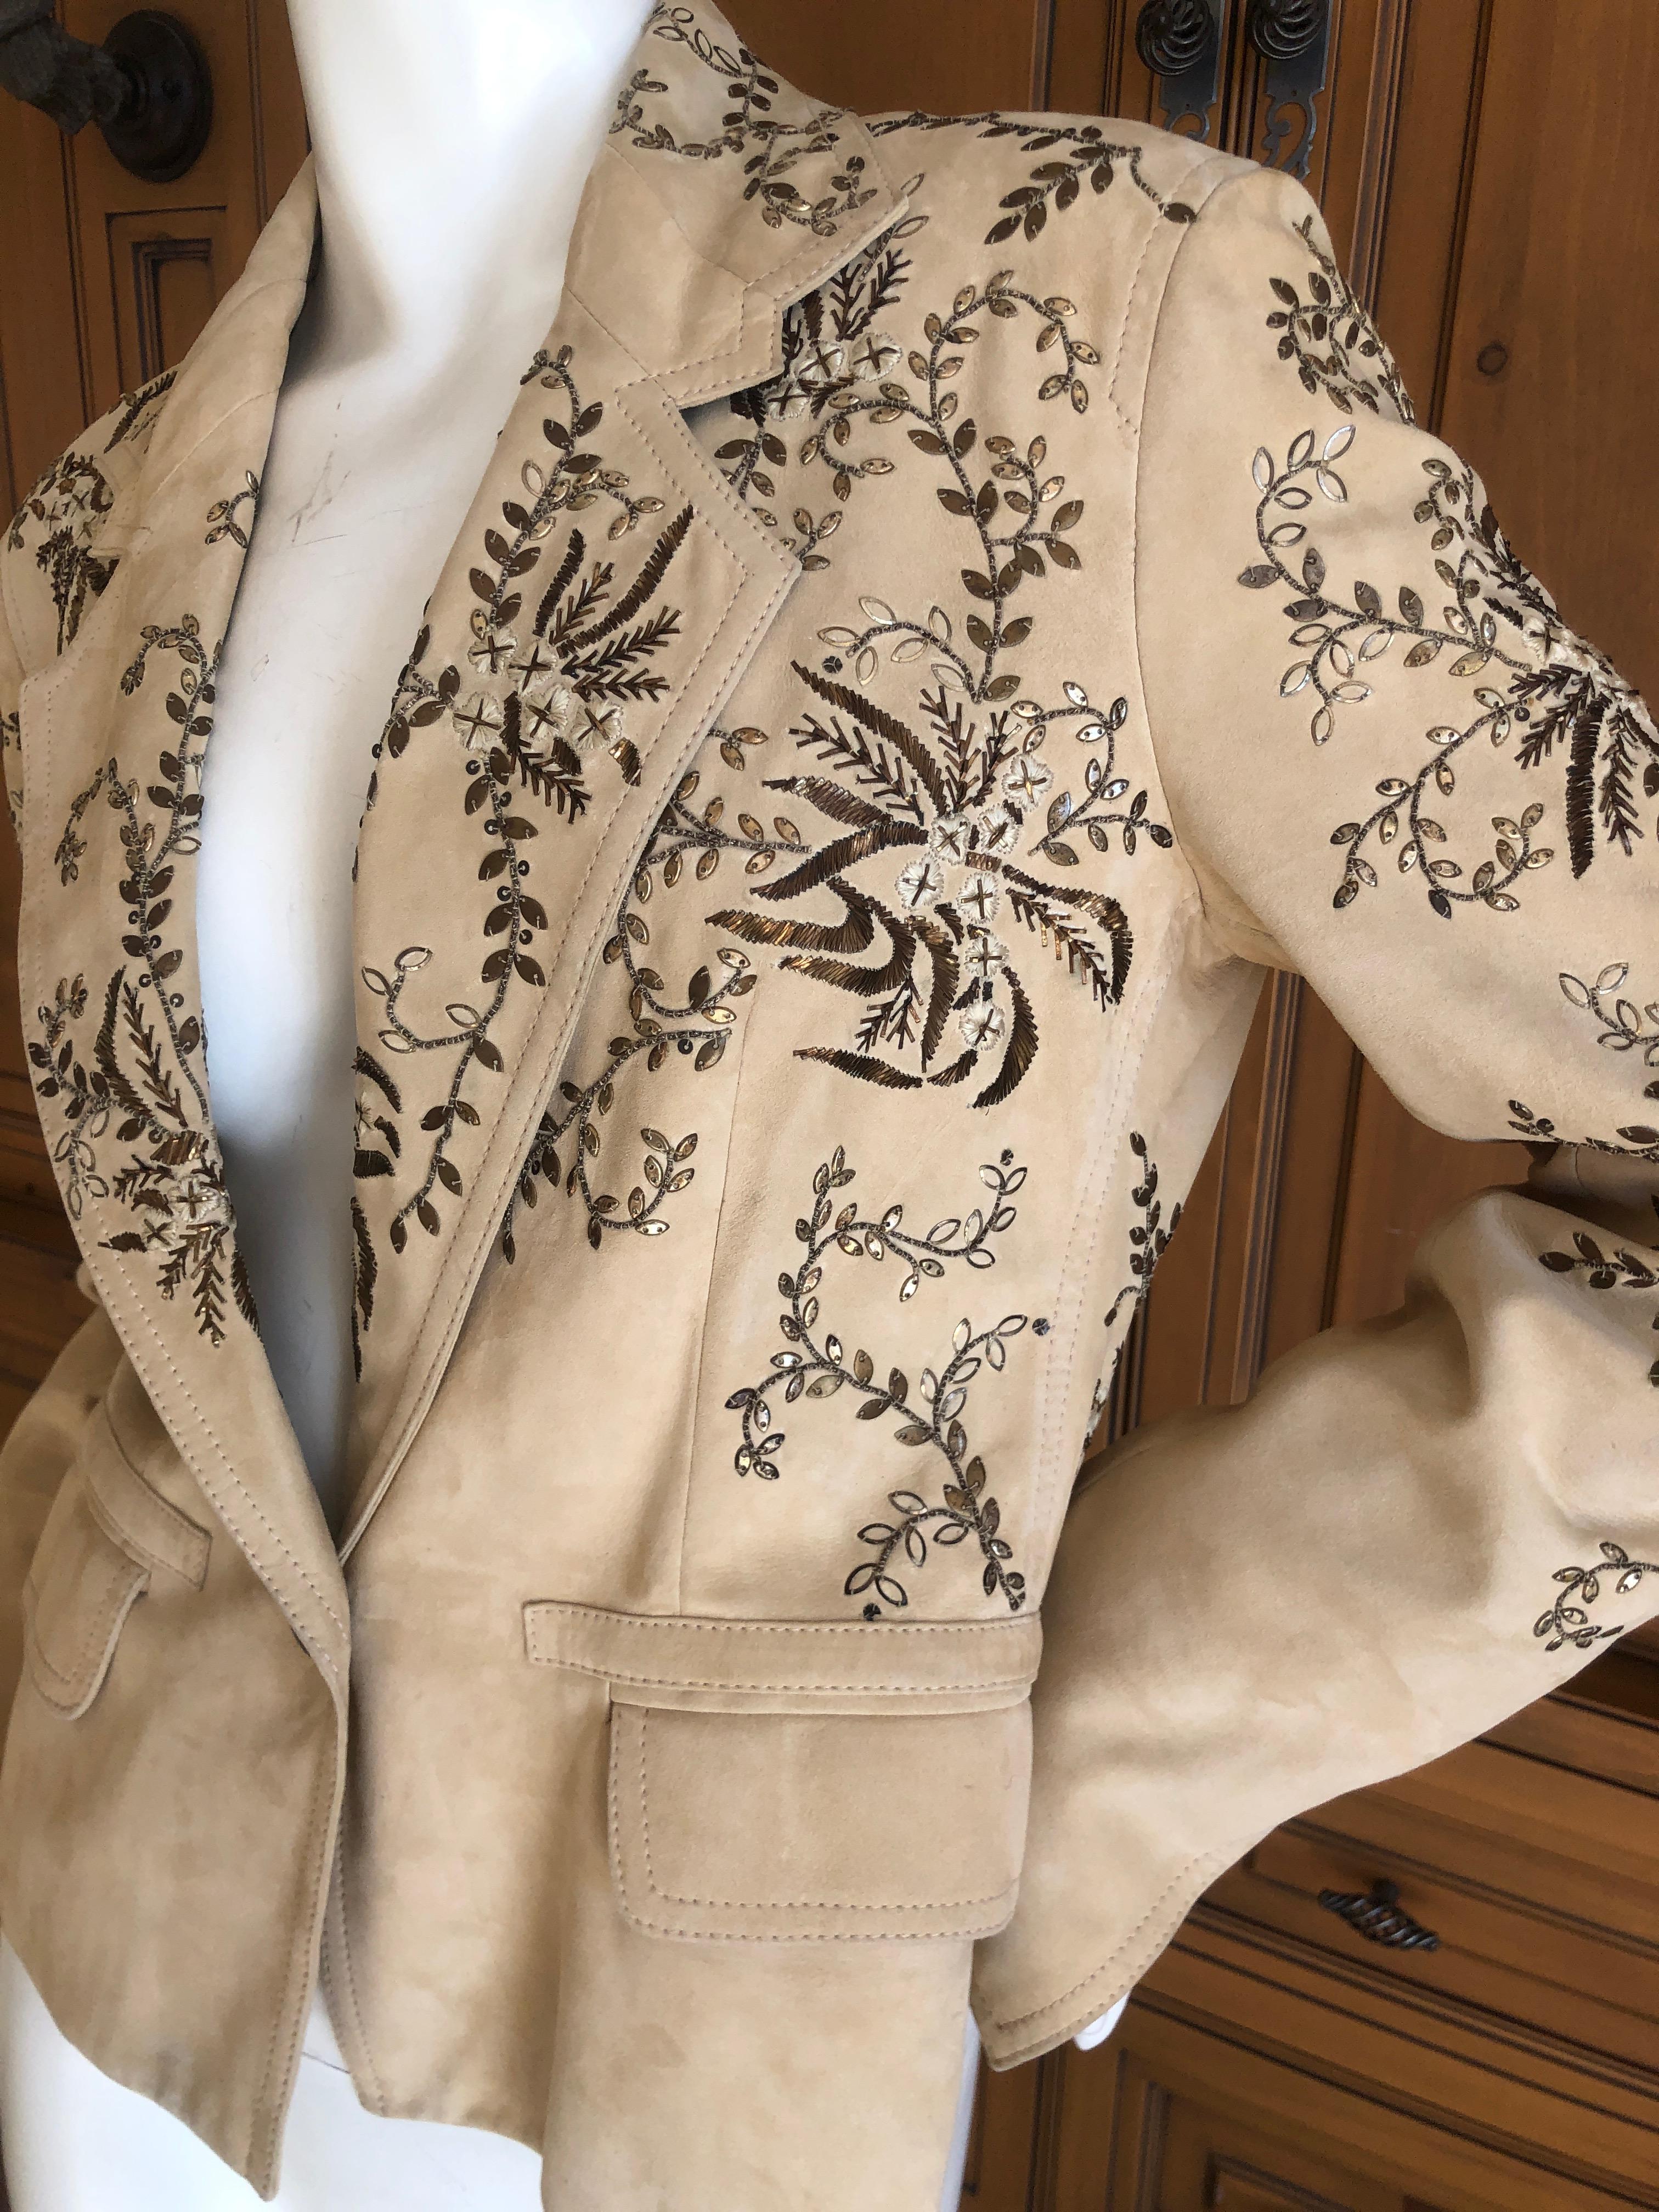 John Galliano Vintage Buff Suede Jacket with Metalwork Embroidery Details
Size 44
 Bust 40